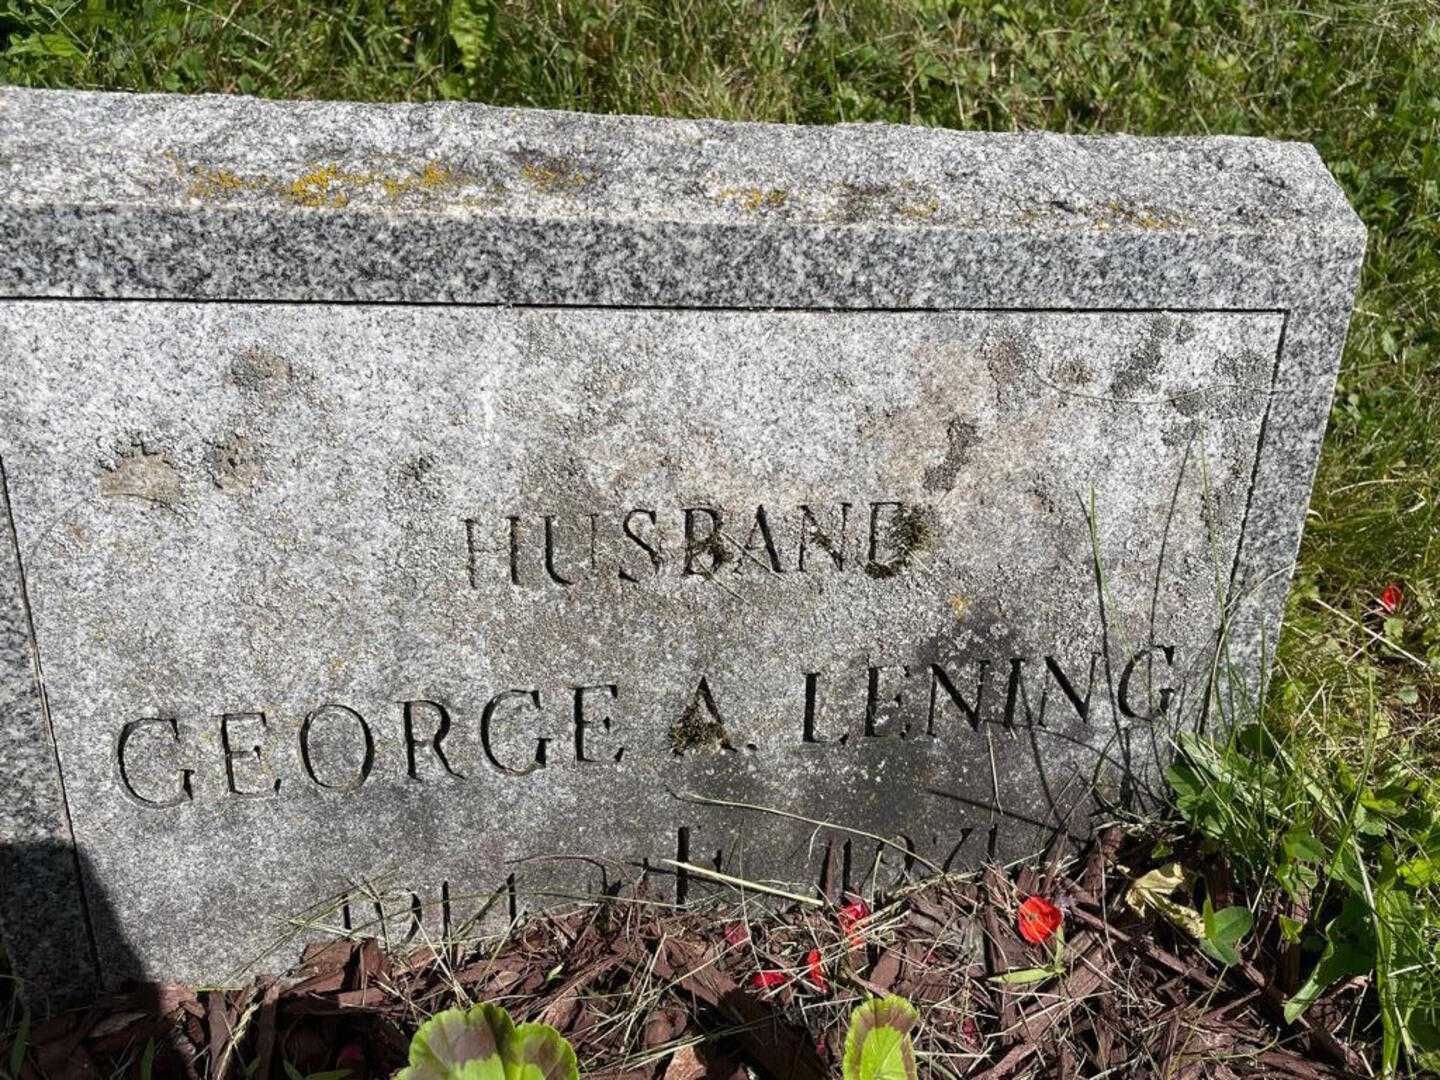 George A. Lening's grave. Photo 3